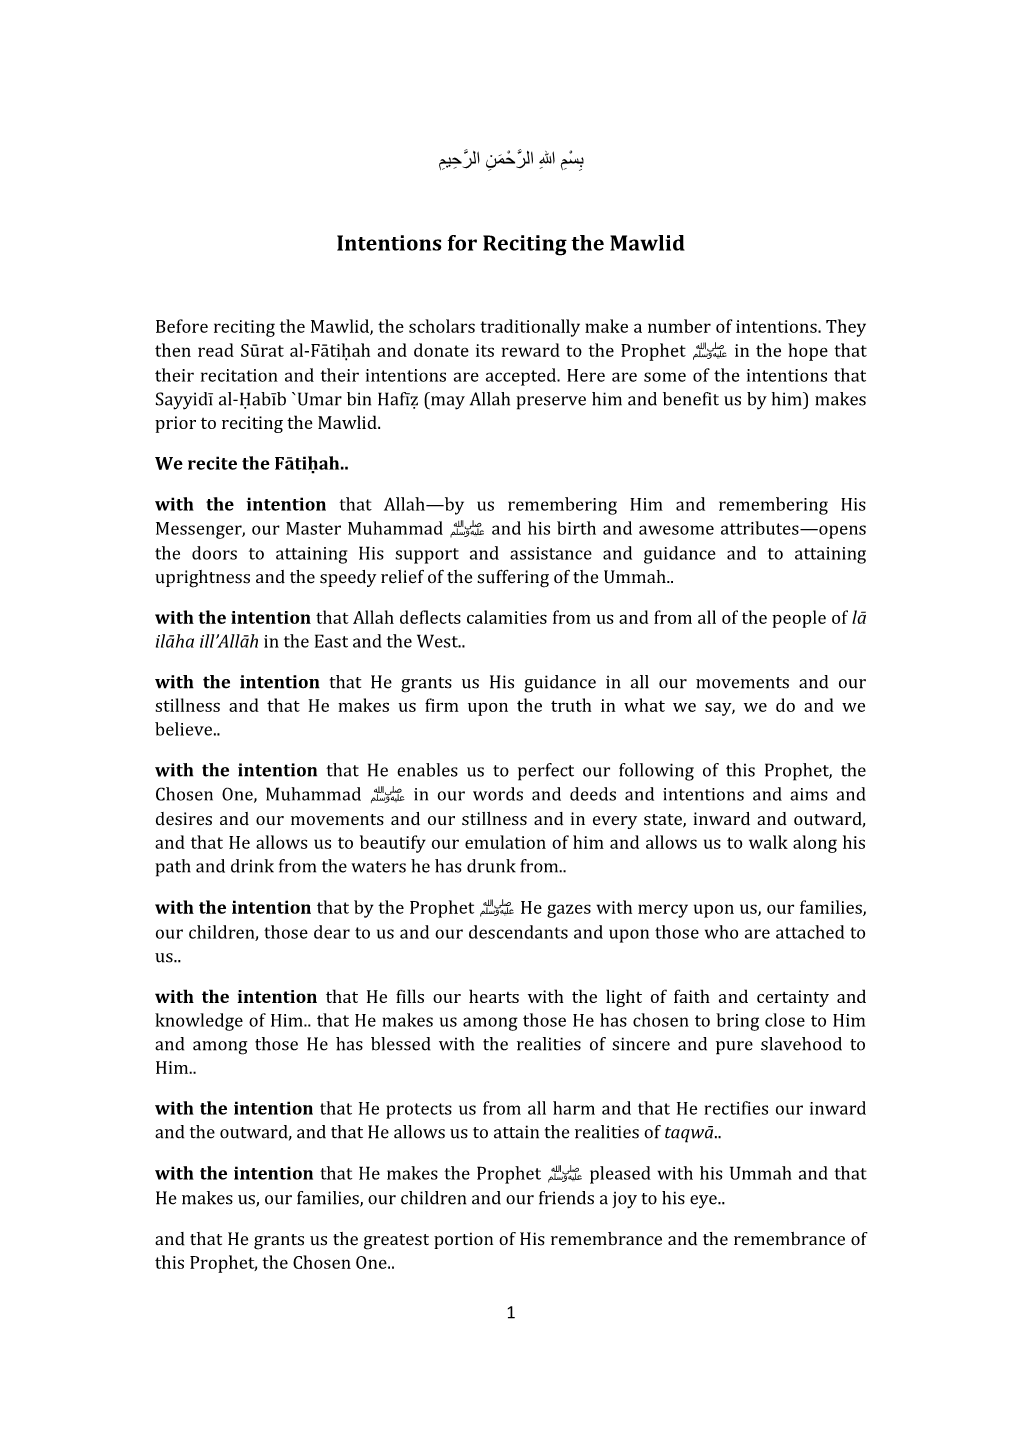 Intentions for Reciting the Mawlid